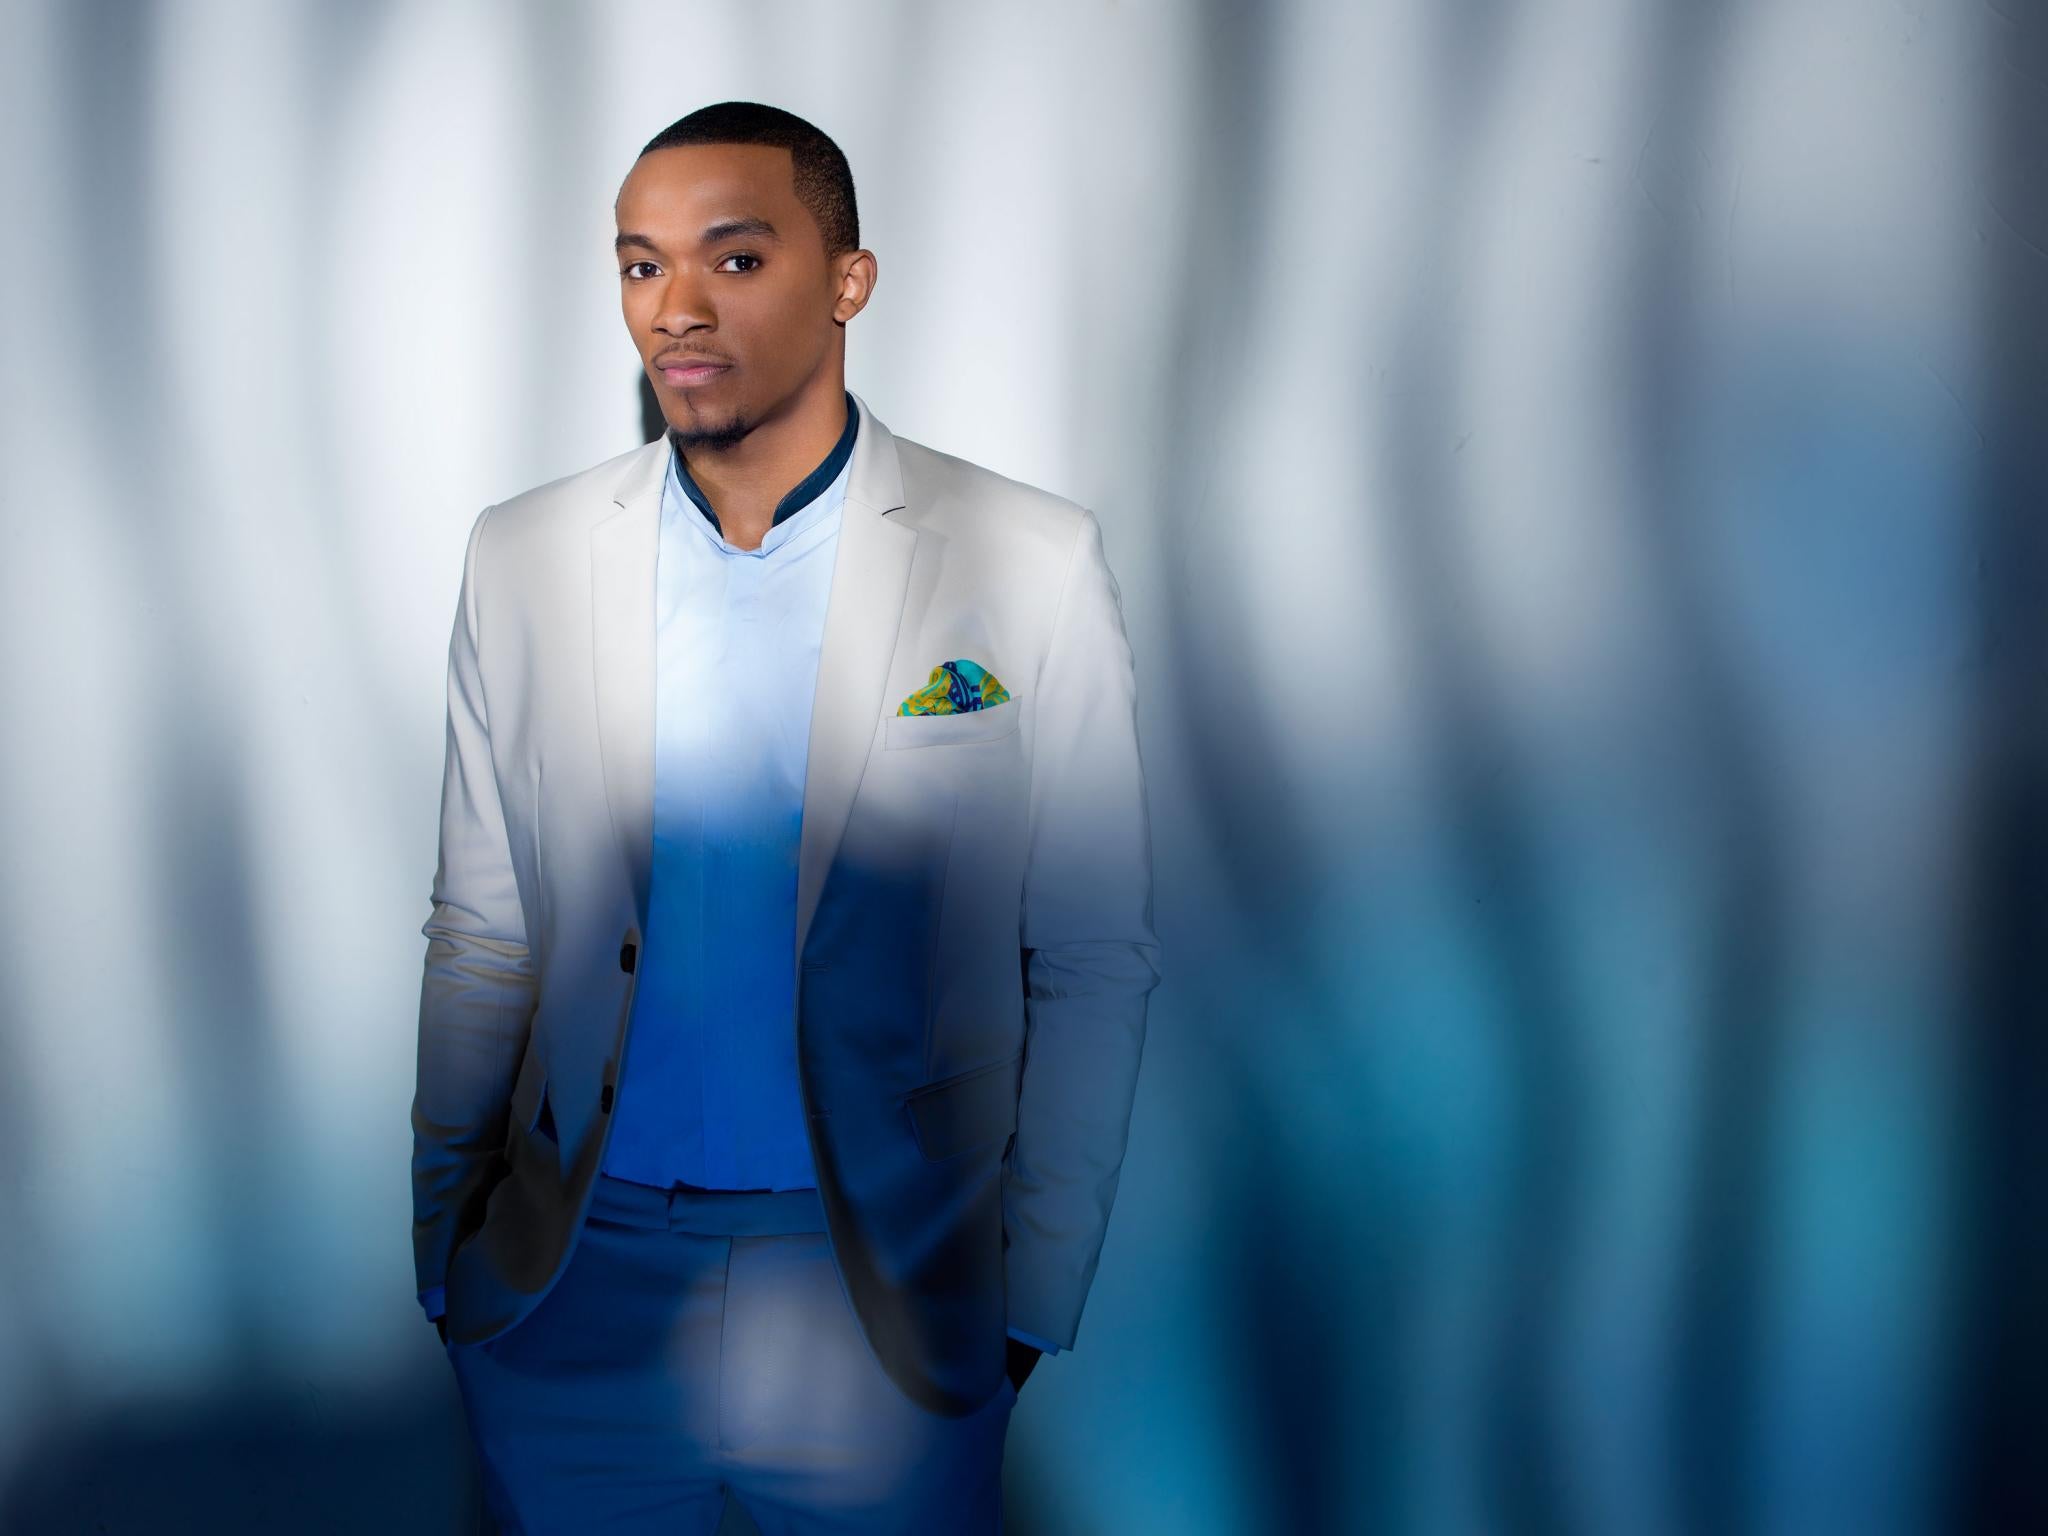 Gospel Singer Jonathan McReynolds' Sweet Melodies on 'Maintain' Will Make Your Sunday